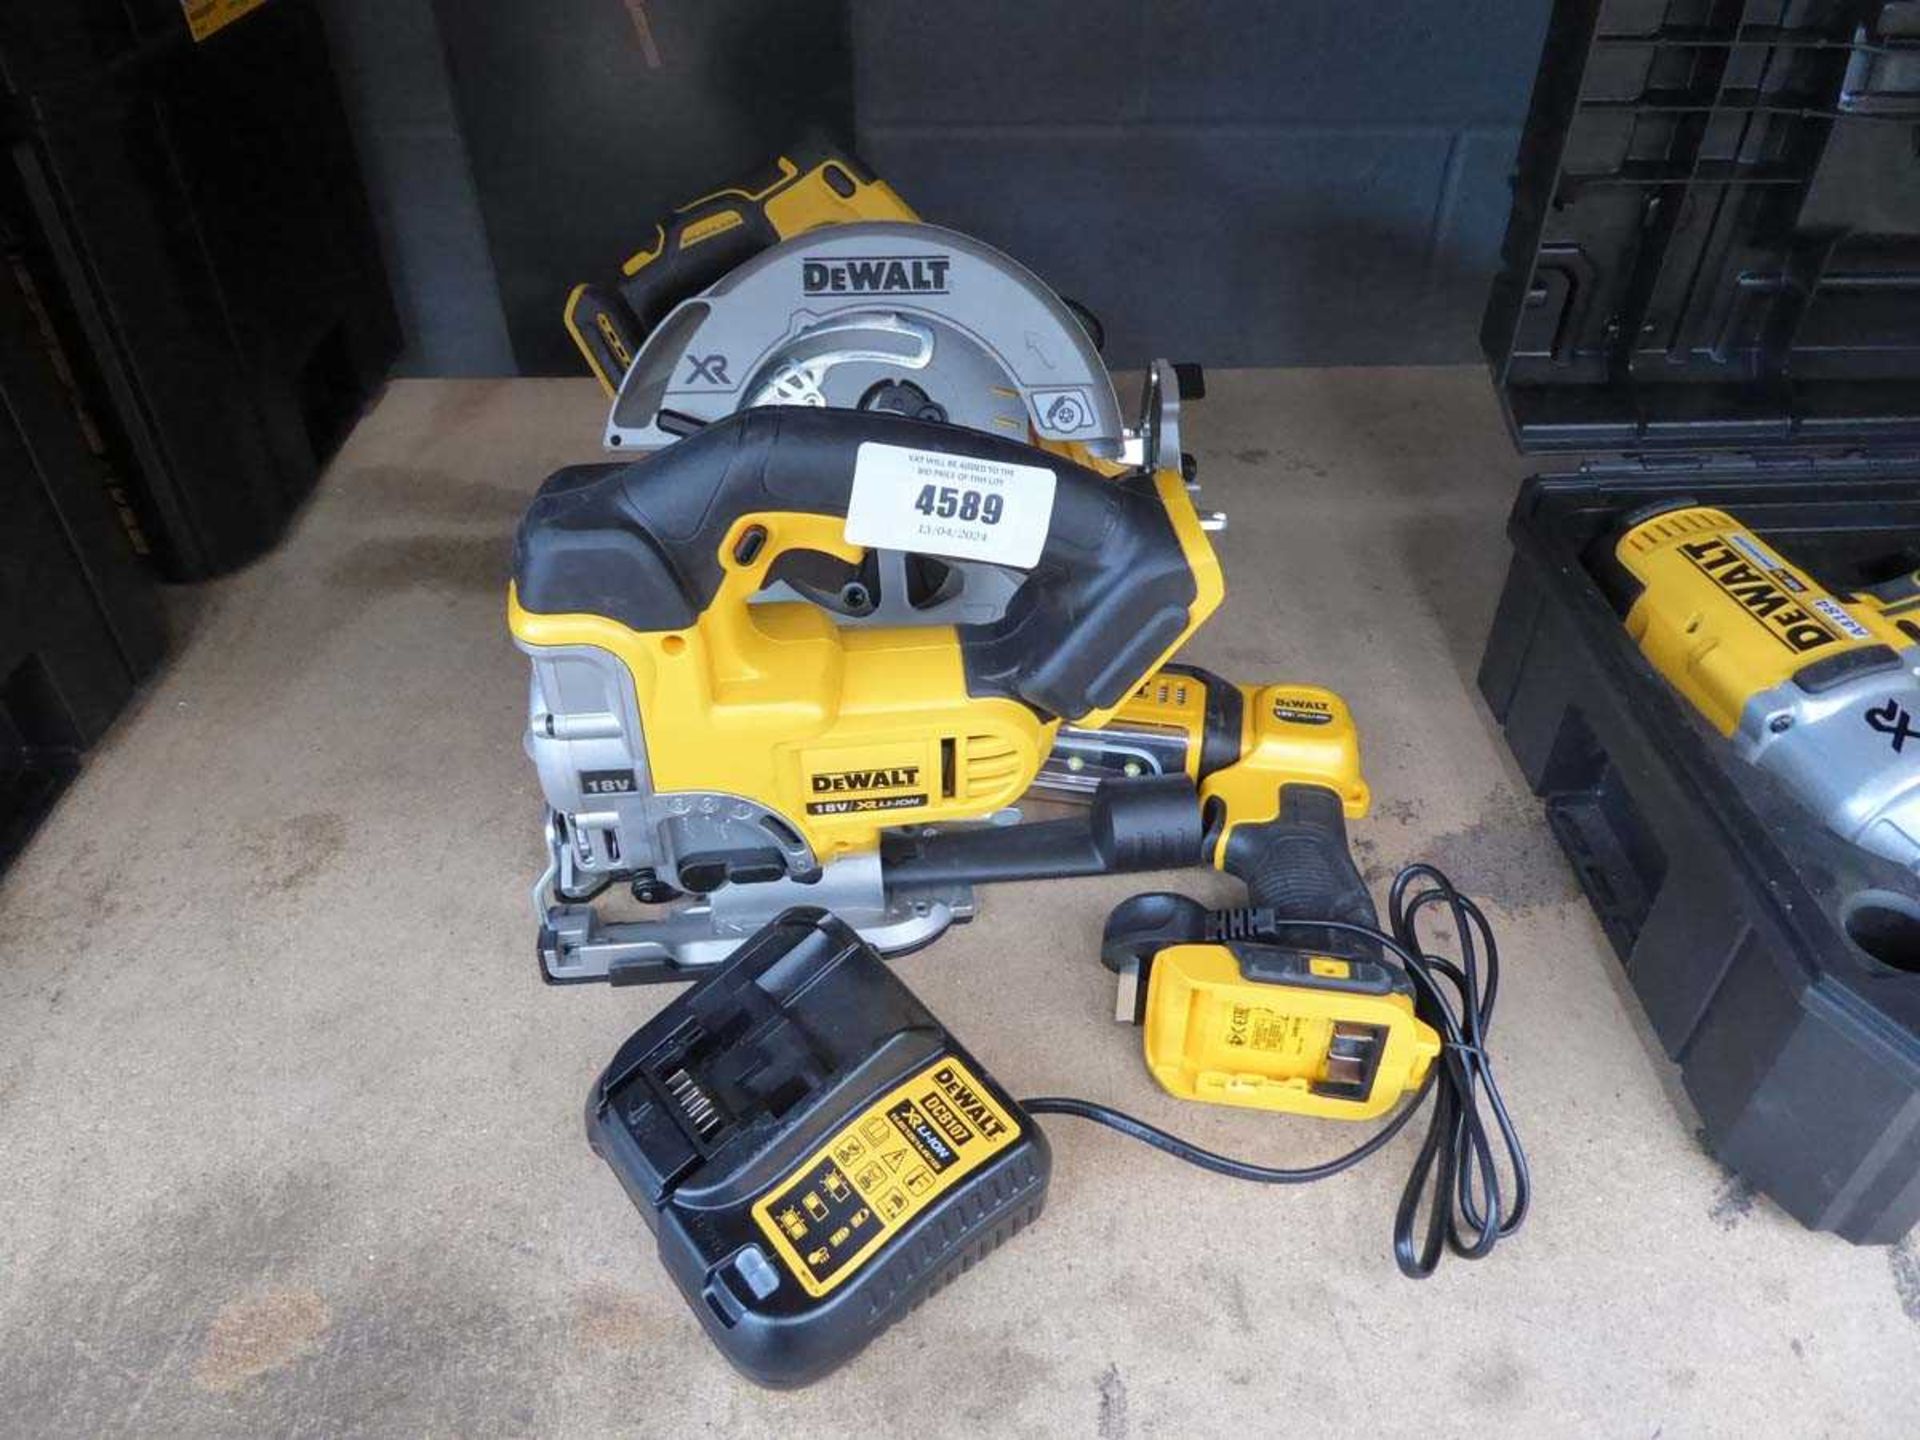 +VAT Dewalt jigsaw, circular saw, torch, with charger, no battery or boxes